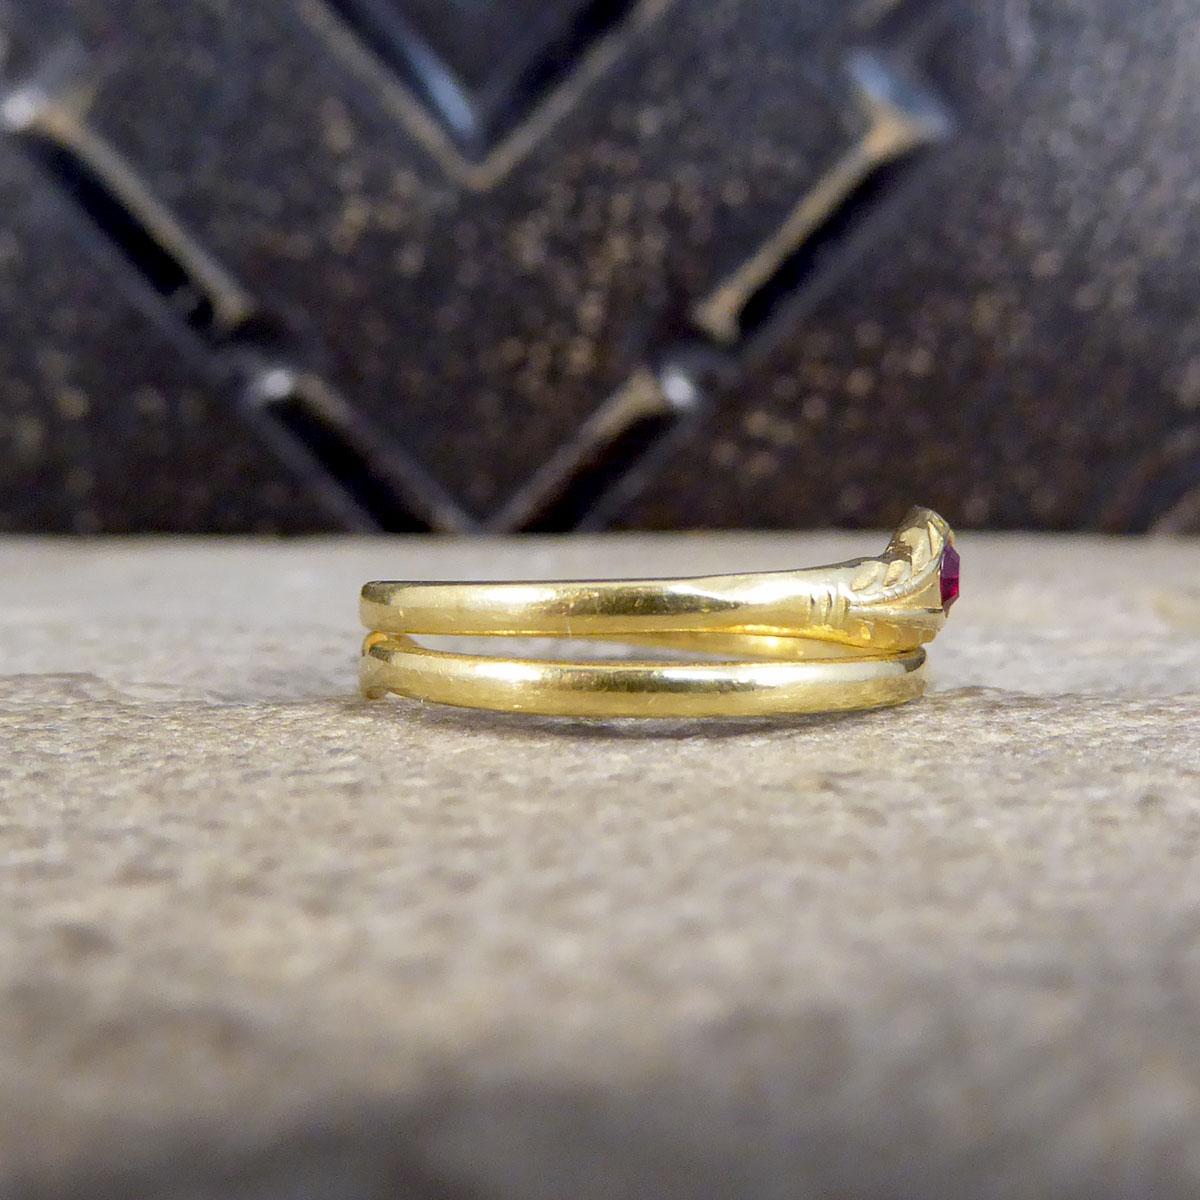 This vintage ring has been fully crafted from 18ct Yellow Gold and has been formed to resemble a snake wrapping around the finger. The snake has a shapely tale and detailed head set with a Garnet. Such a lovely little vintage serpent ring. This ring